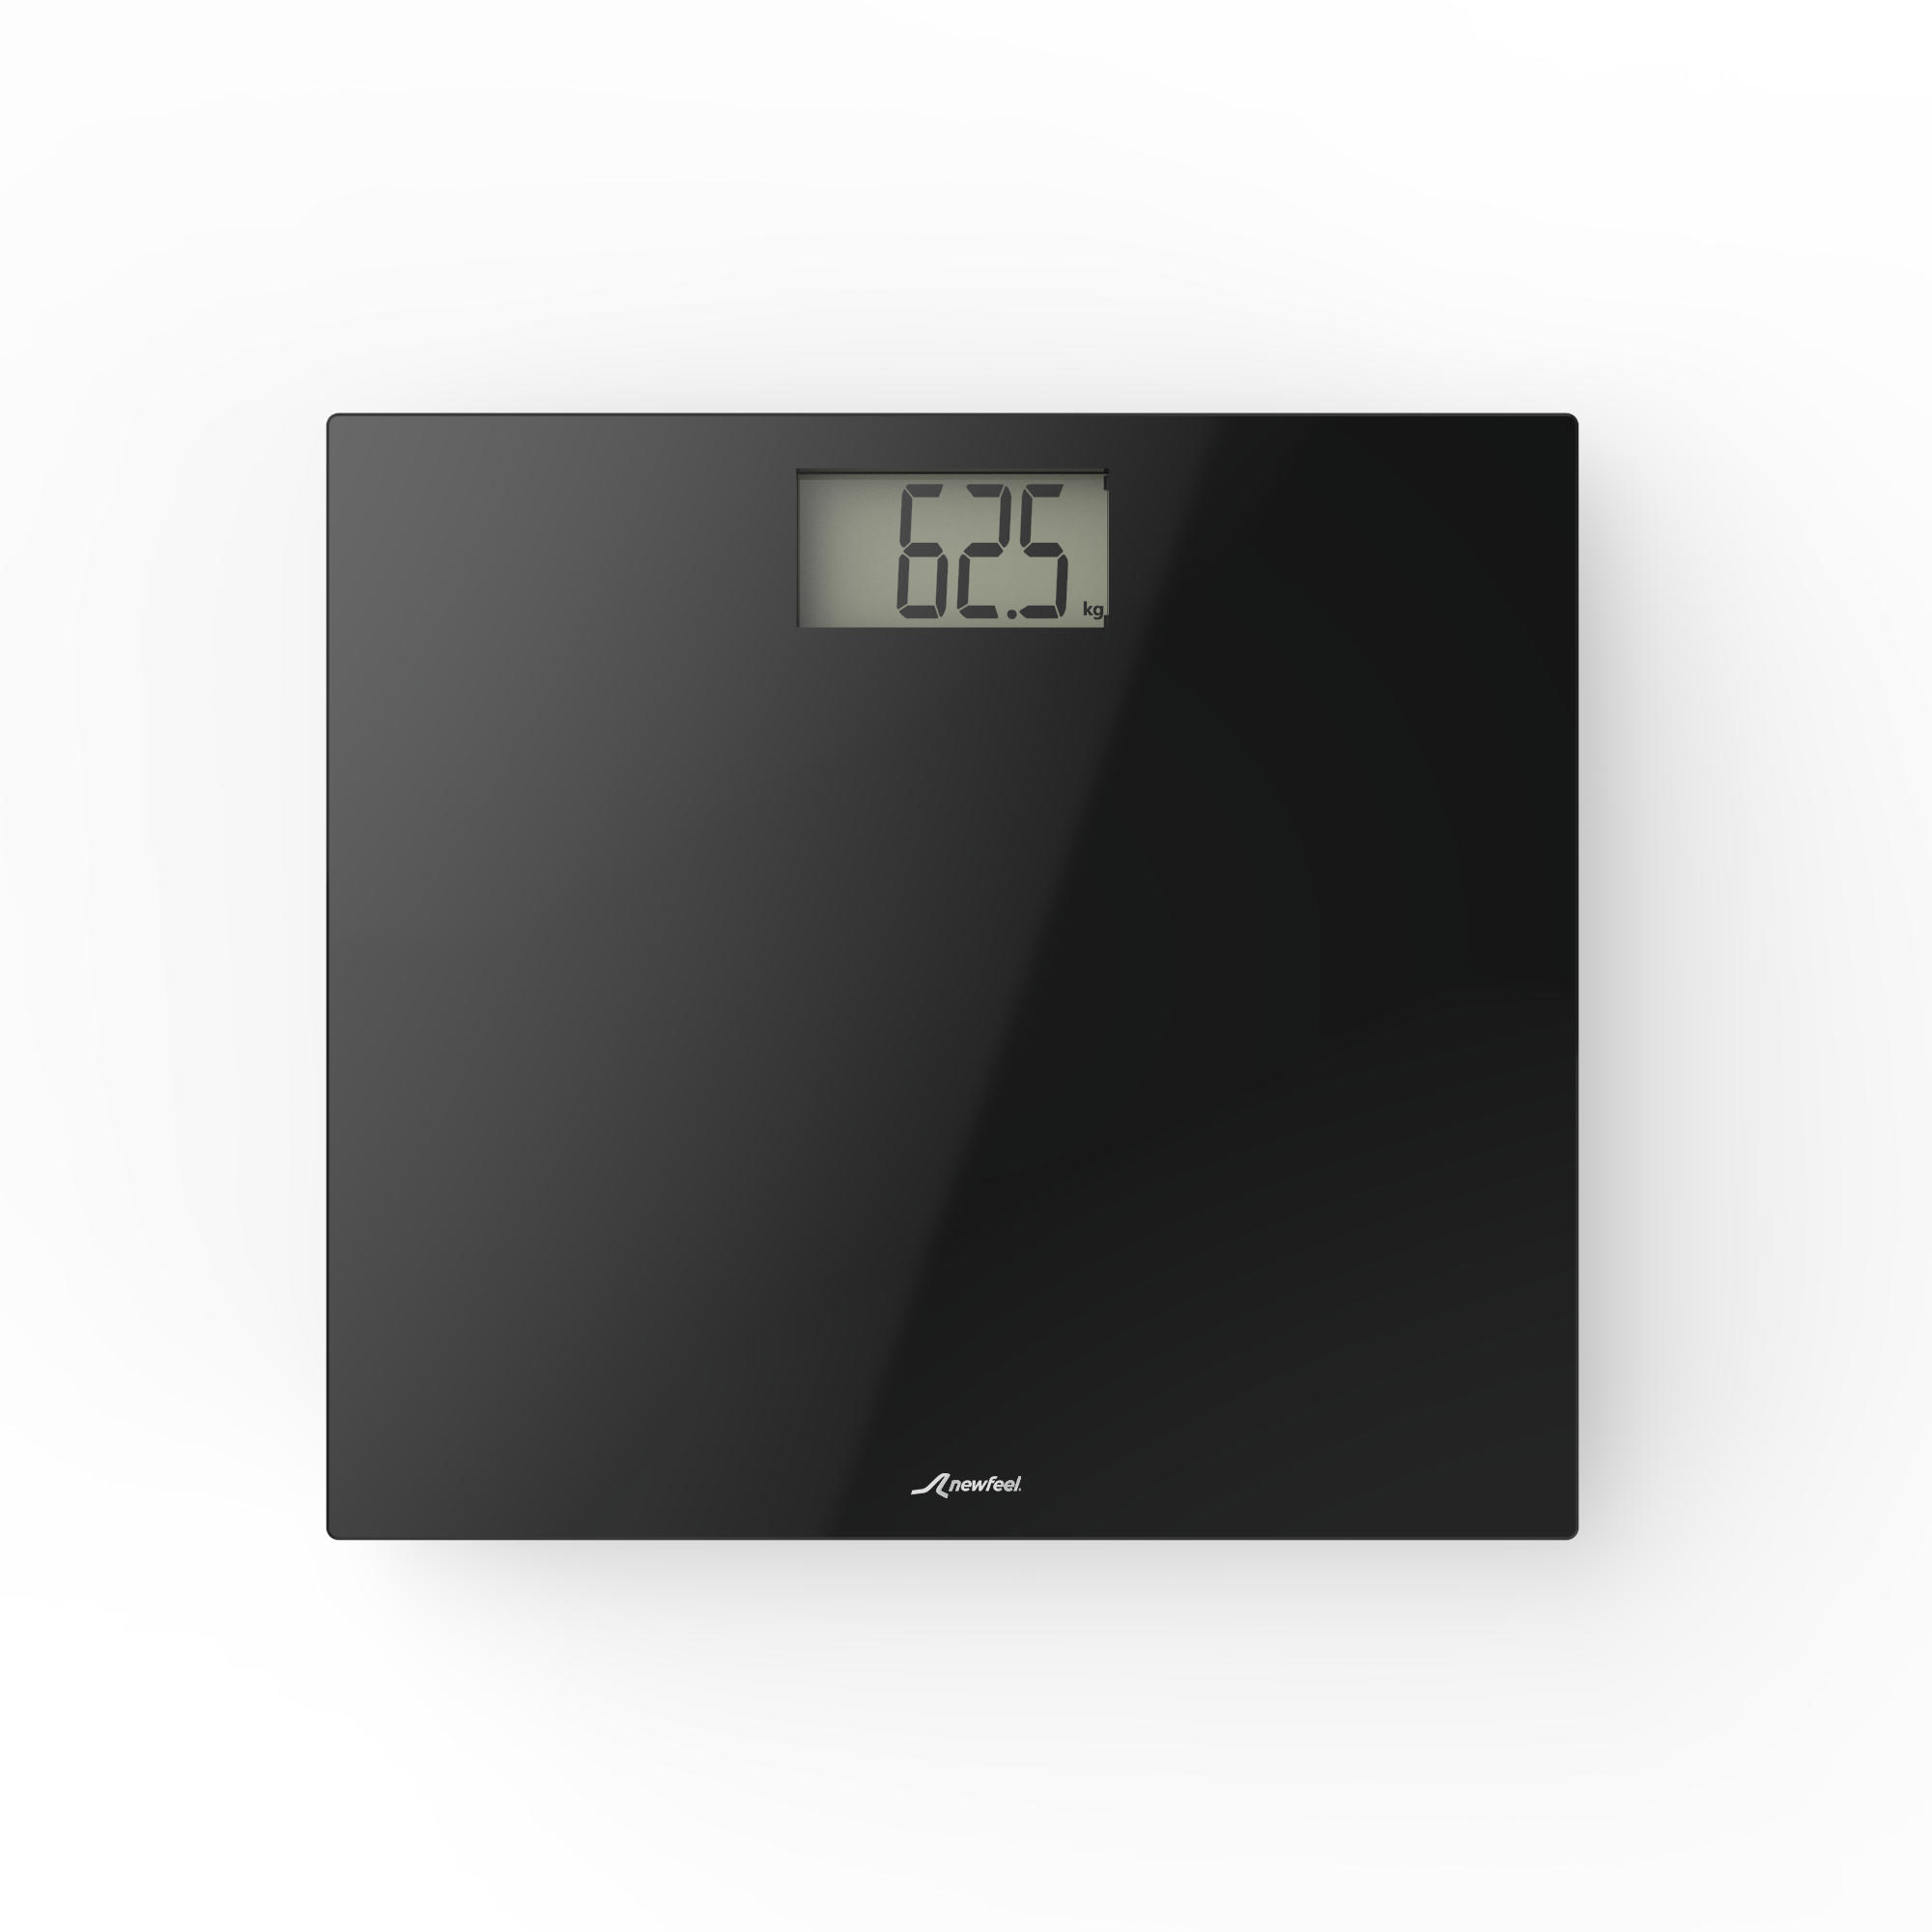 SCALE 100 PERSONAL SCALES - GLASS